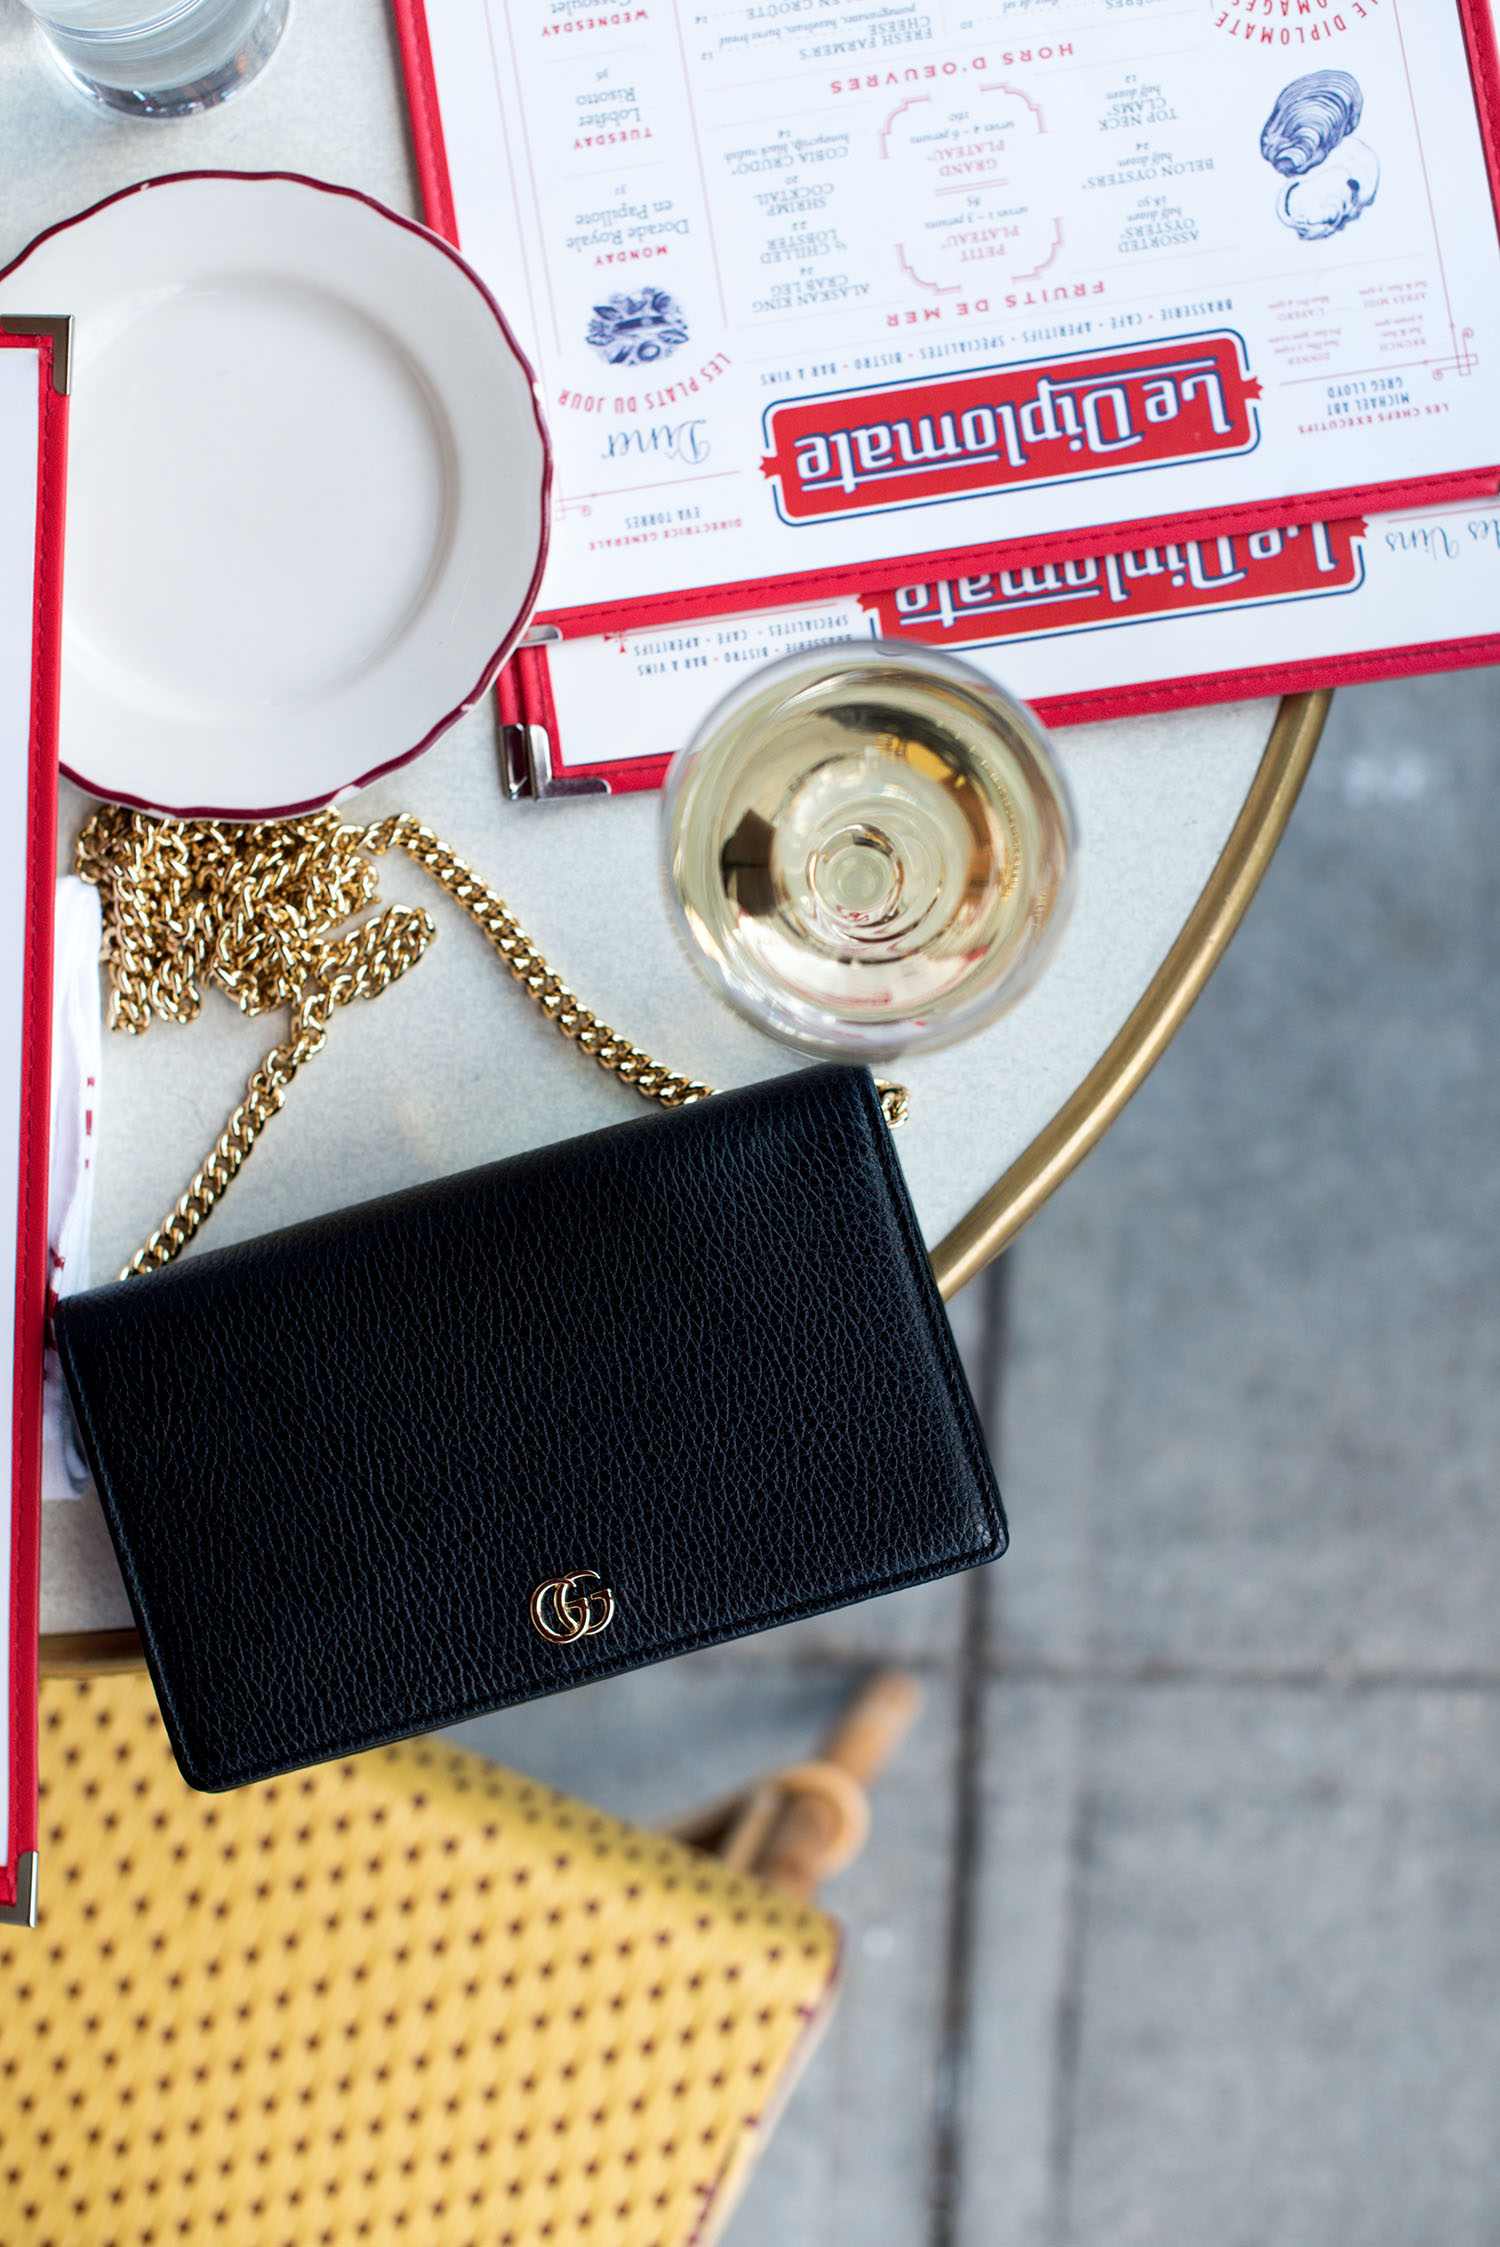 A Gucci marmont black leather bag and a glass of white wine on a table at Le Diplomate in Washington DC, as photographed by Canadian fashion blogger Cee Fardoe of Coco & Vera